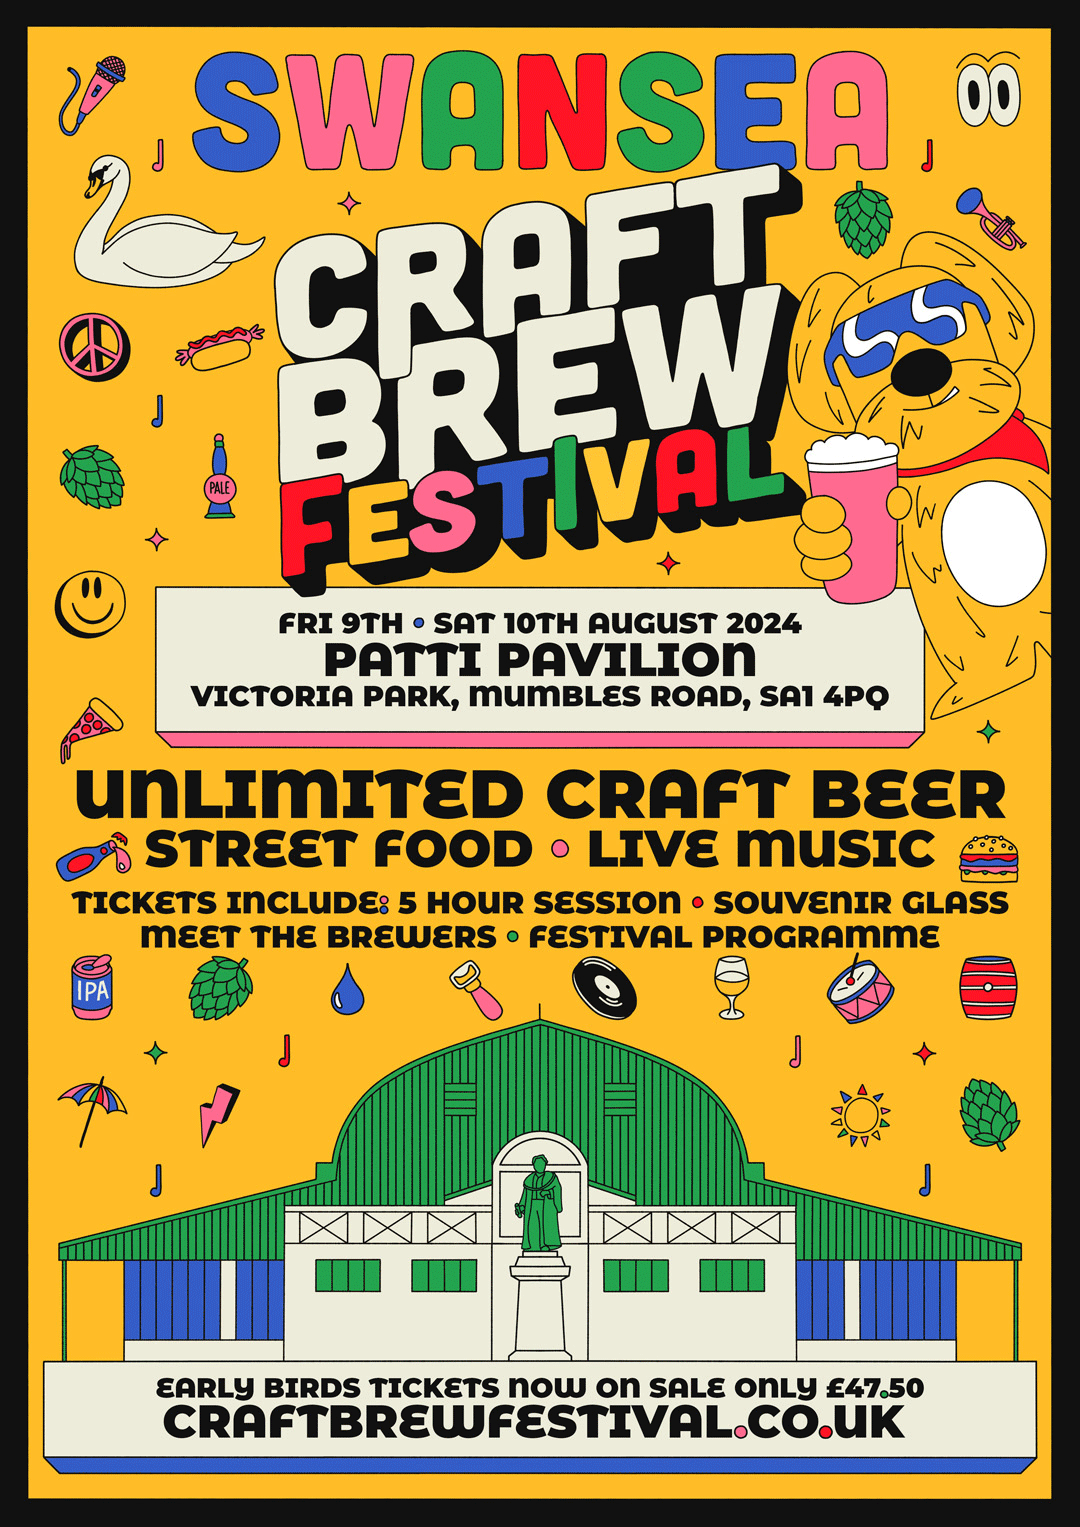 All 6 Craft Brew Festival Posters for 2024